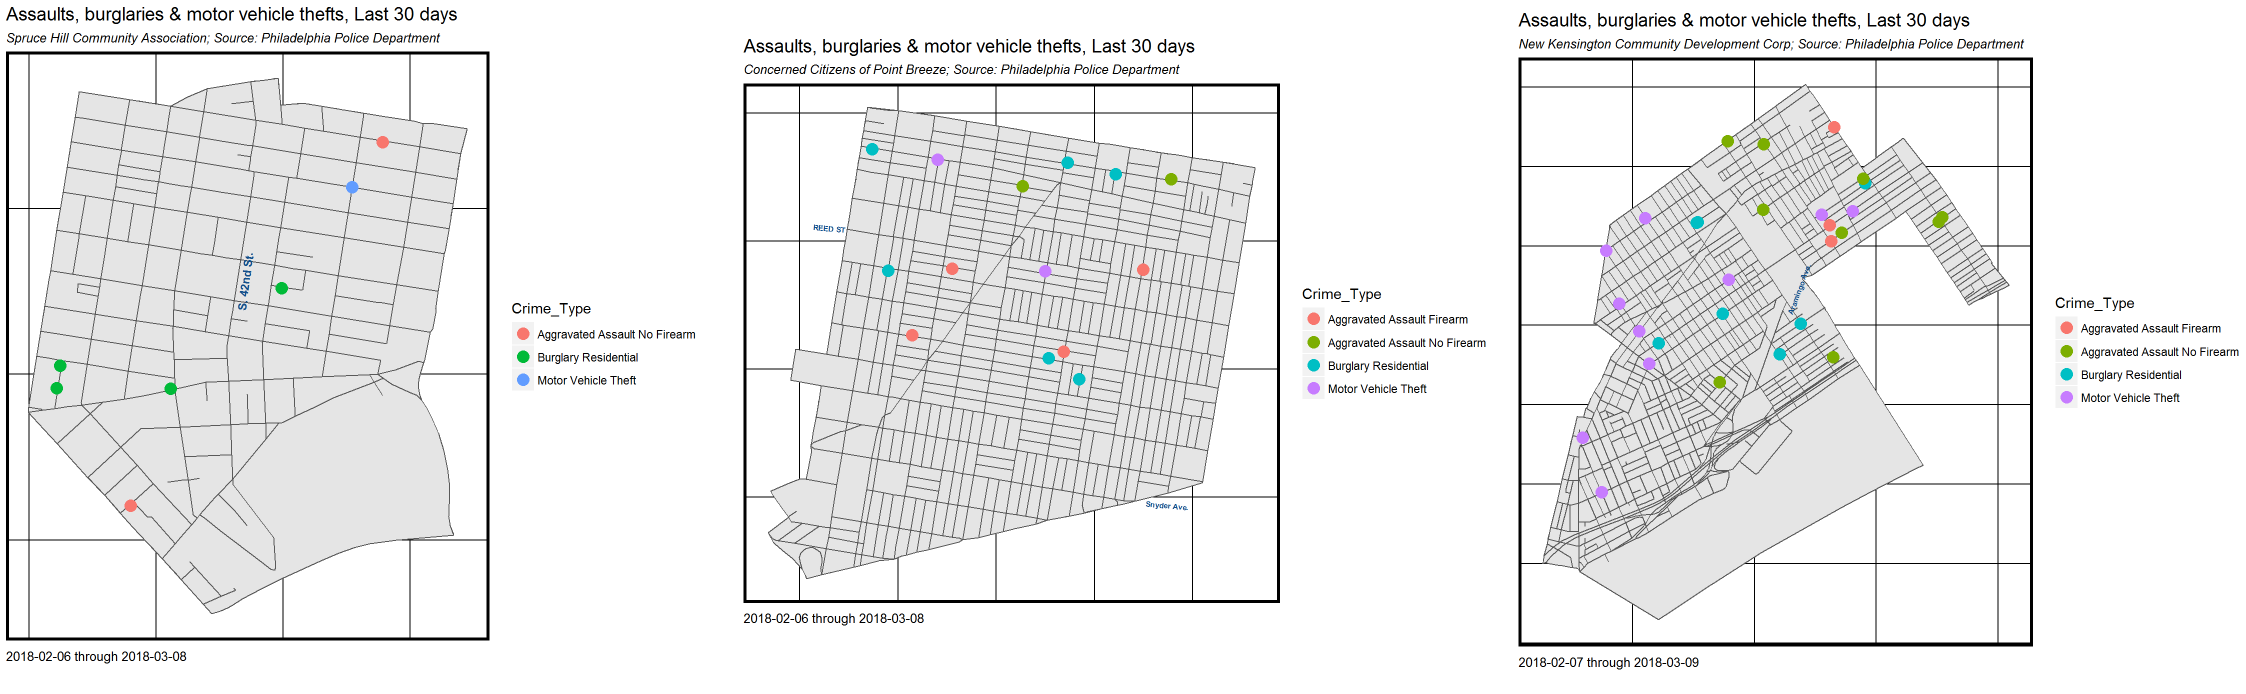 Visualization maps of 30 days of select crimes in Spruce Hill, Point Breeze, and Kensington. Credit: Ken Steif